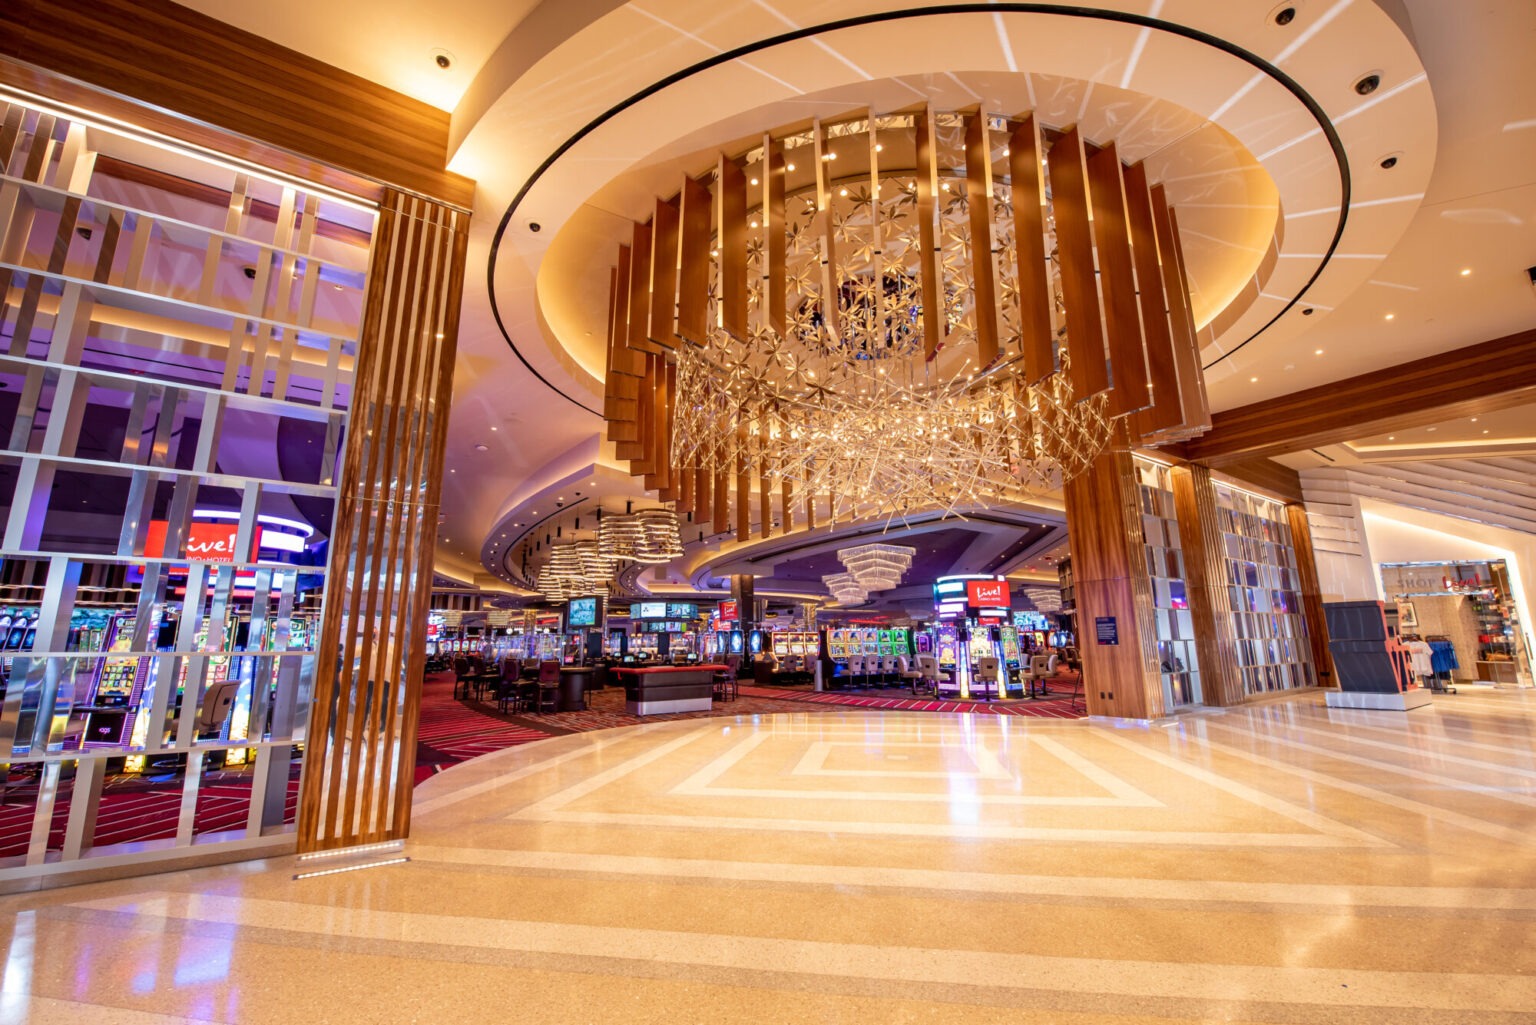 Philly Live Casino in Philadelphia PA used Glenn RIeder as their commercial interior contractor for the facility.